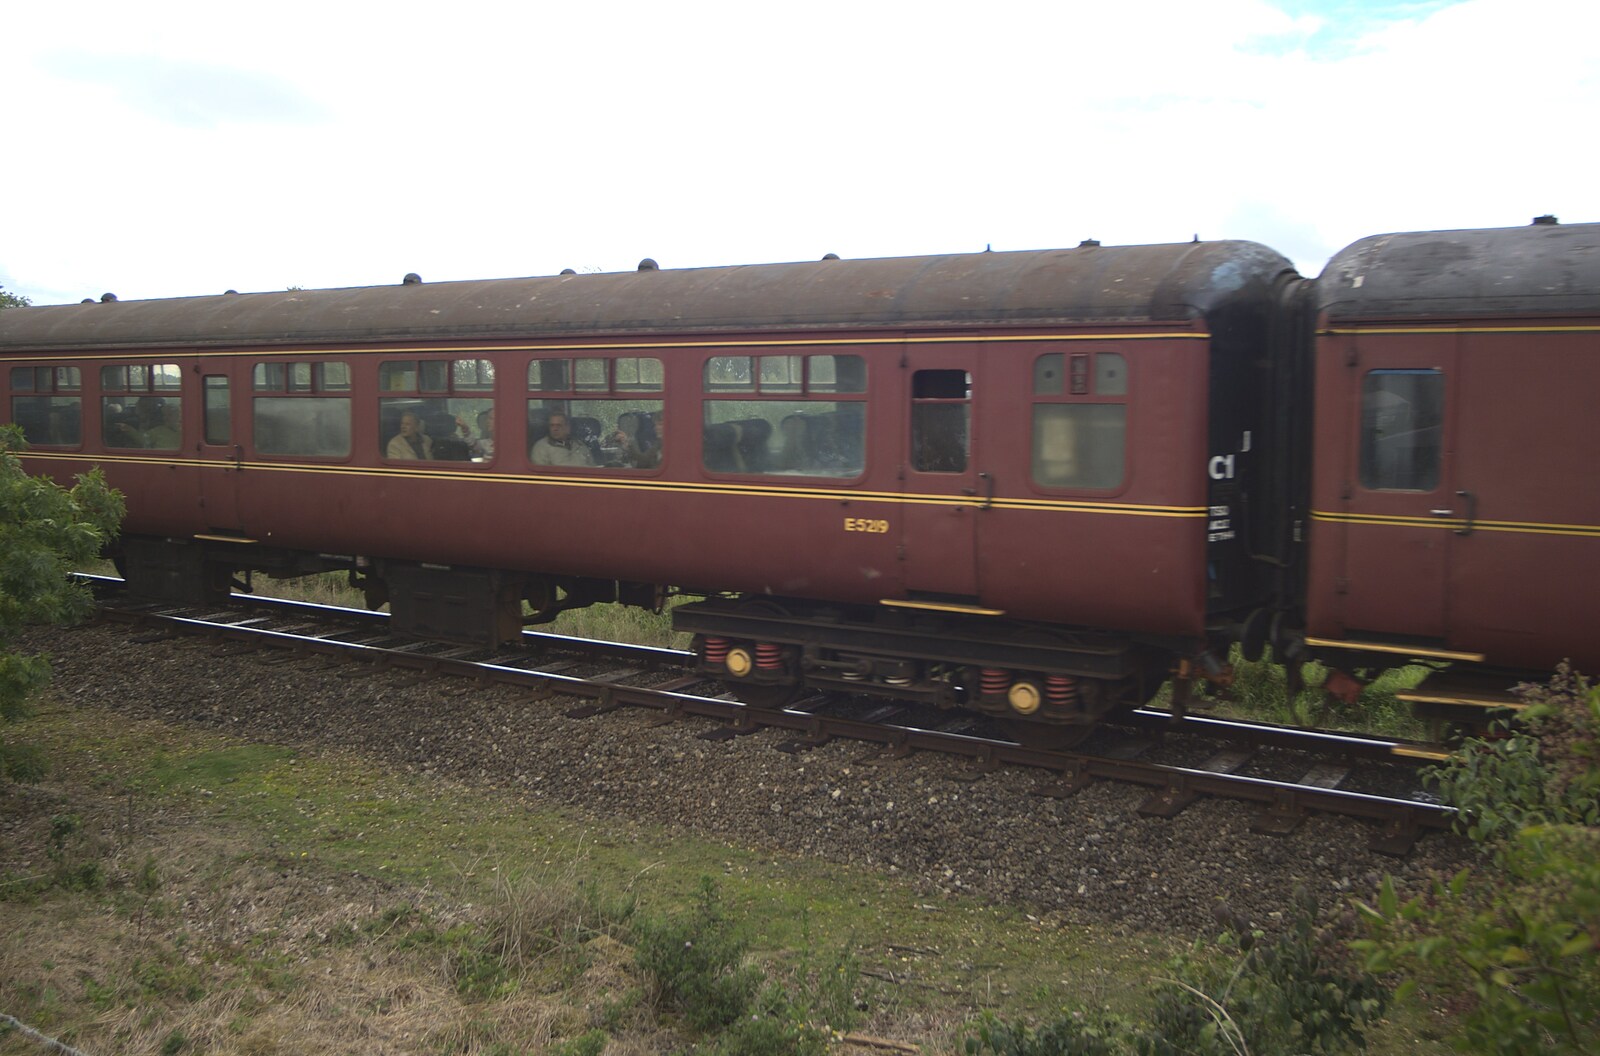 Camping with Trains, Yaxham, Norfolk - 29th August 2010: Mark 1 coaches go past